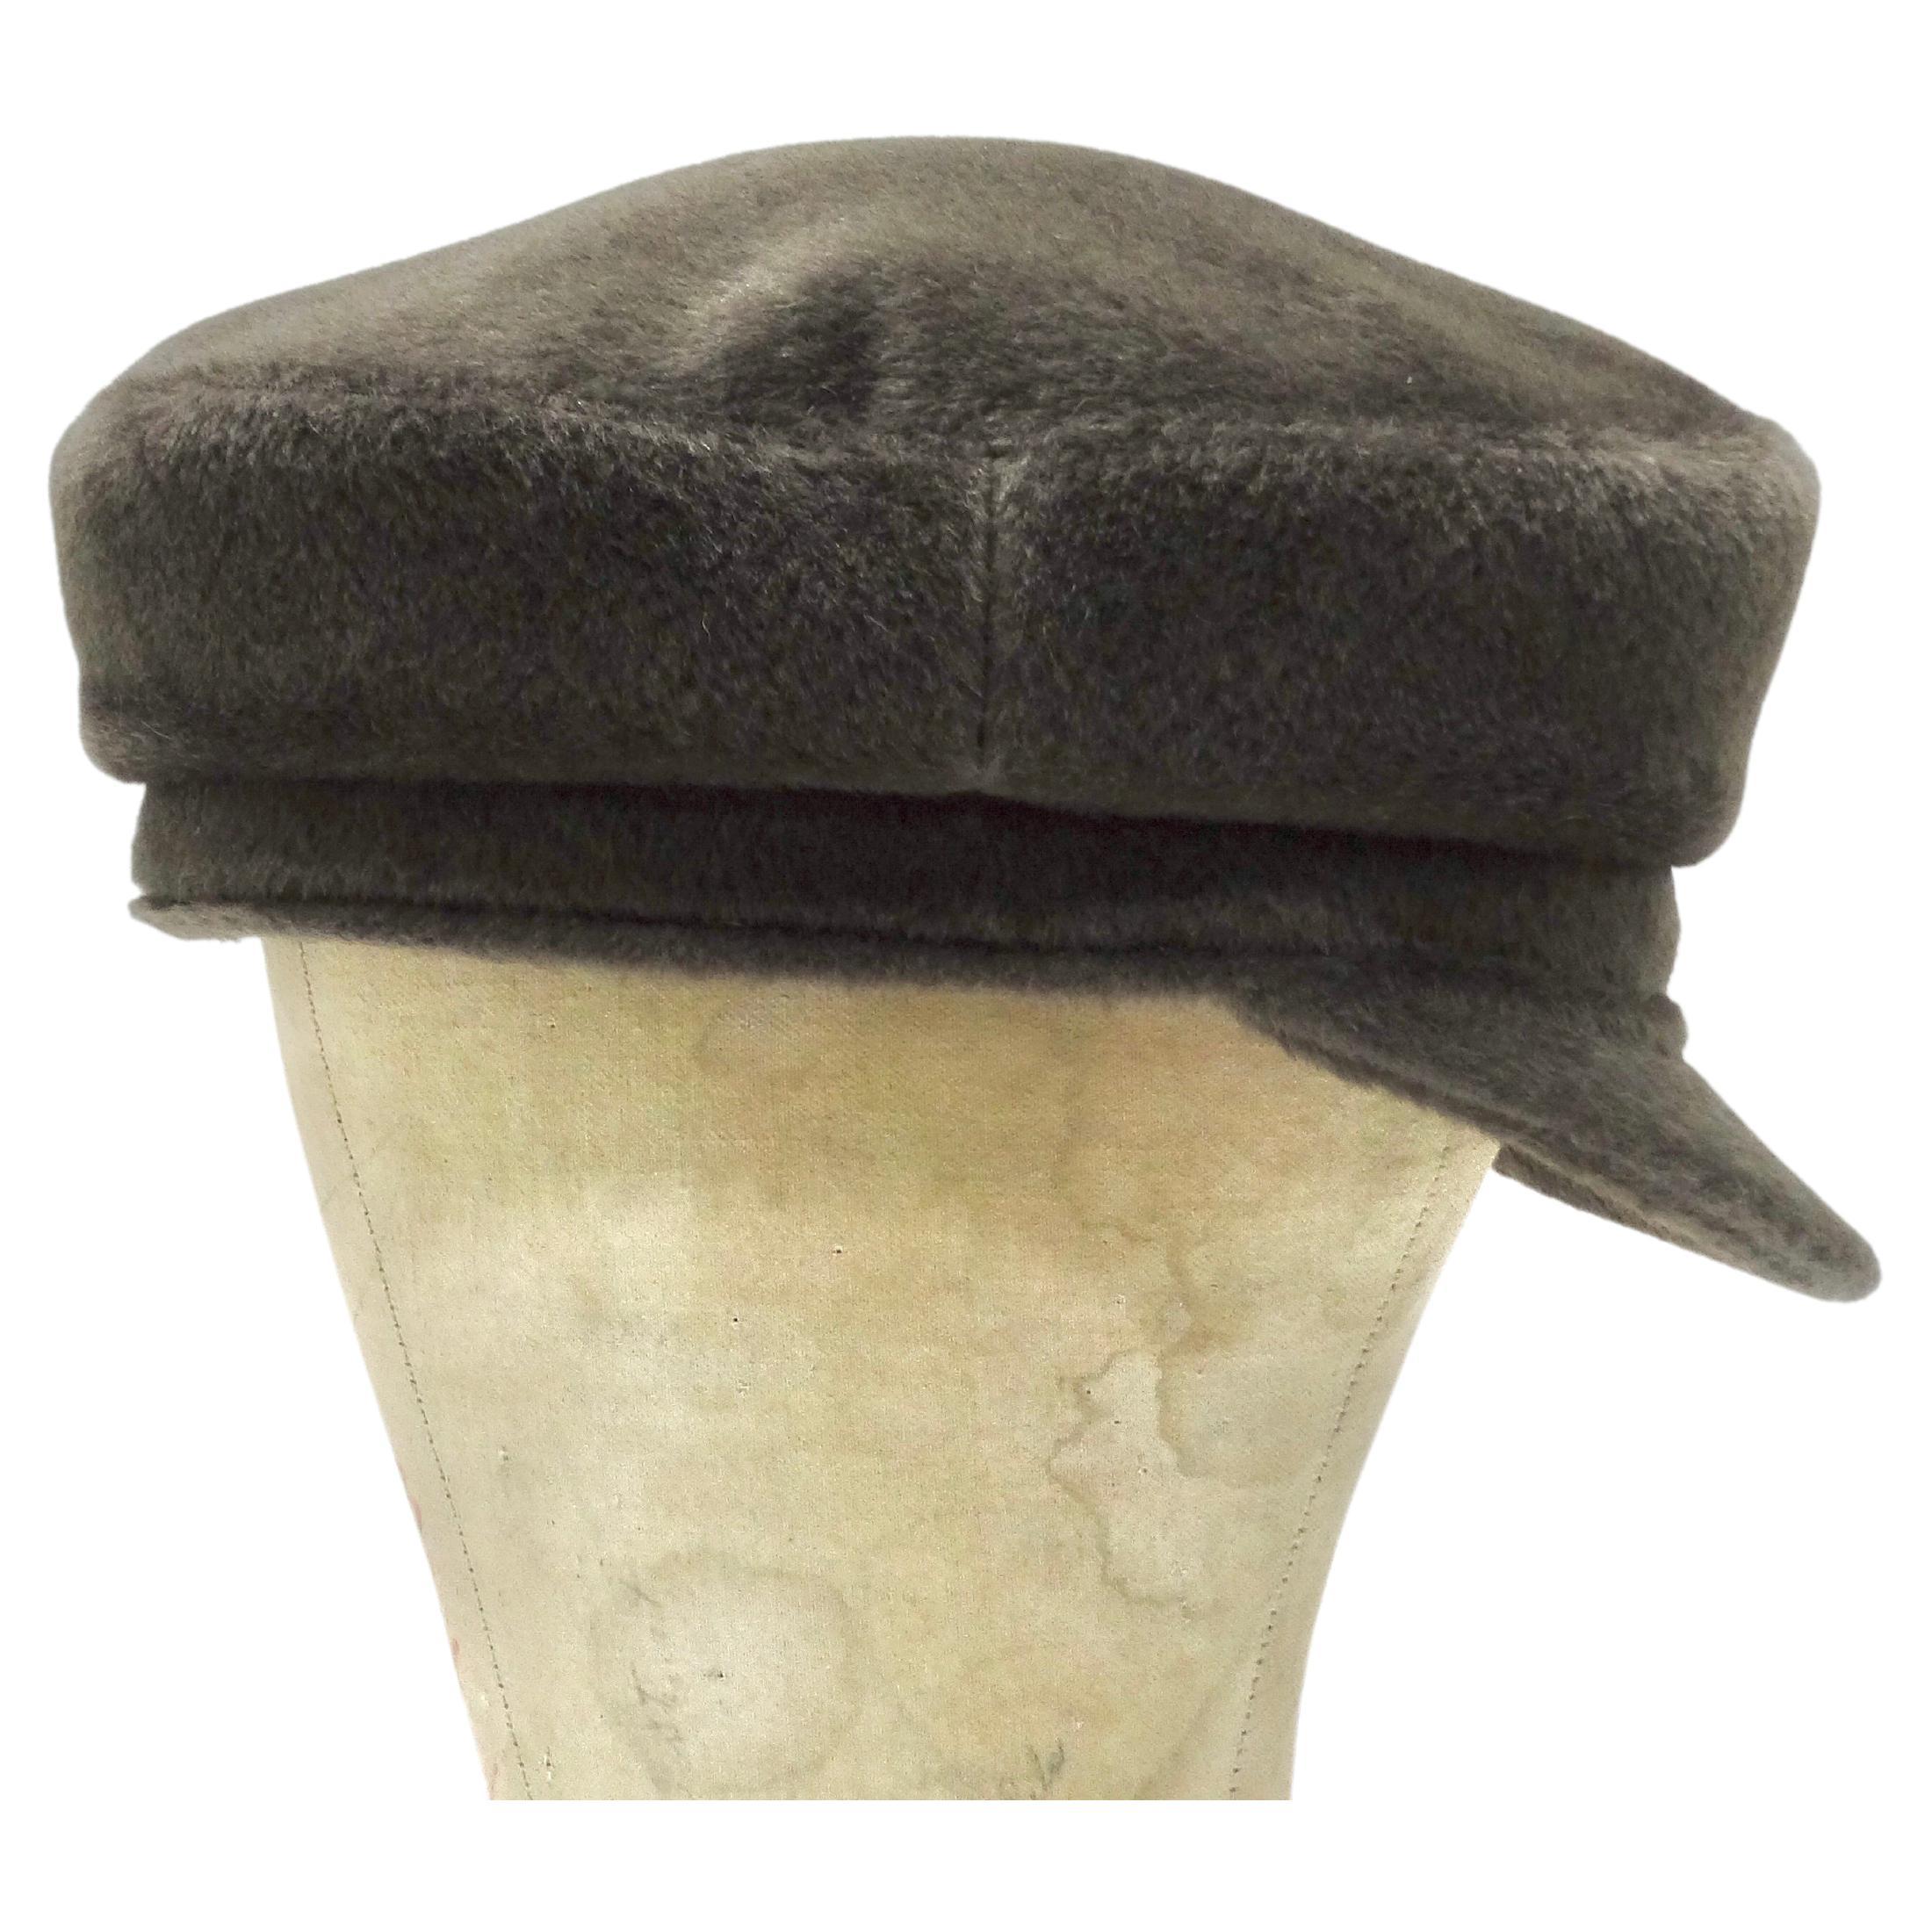 Command your wardrobe with this Hermes Wool Fisherman hat. This wool silk blend hat is perfect for winter and fall festivities. It will offer you the warmth and comfort you need for the winter months without sacrificing you any style points. Pair